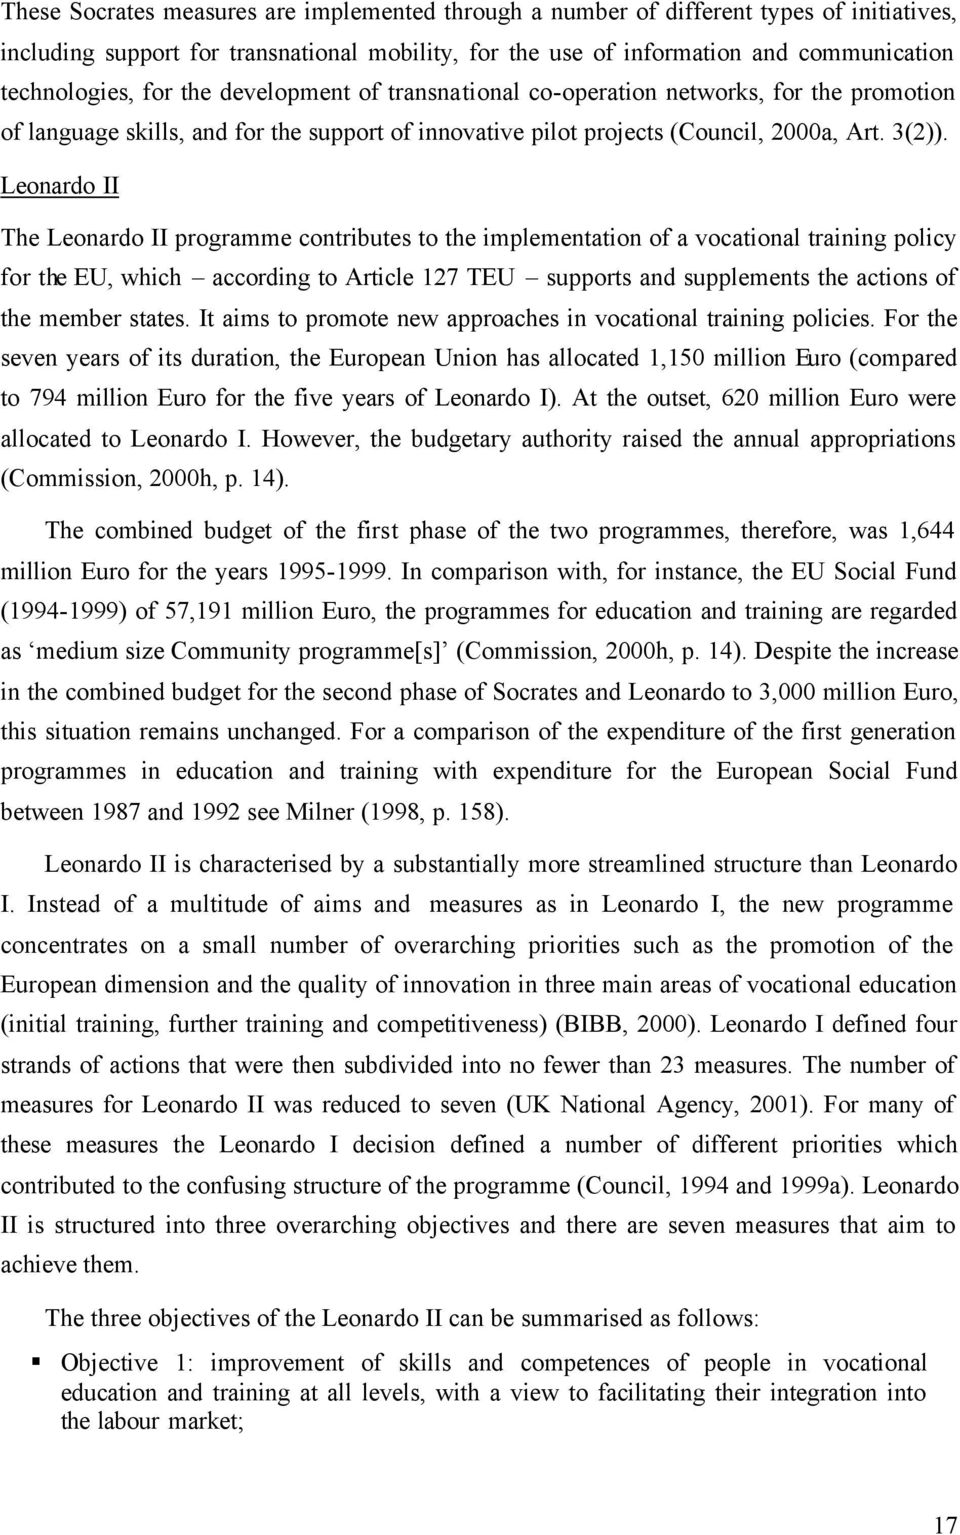 Leonardo II The Leonardo II programme contributes to the implementation of a vocational training policy for the EU, which according to Article 127 TEU supports and supplements the actions of the